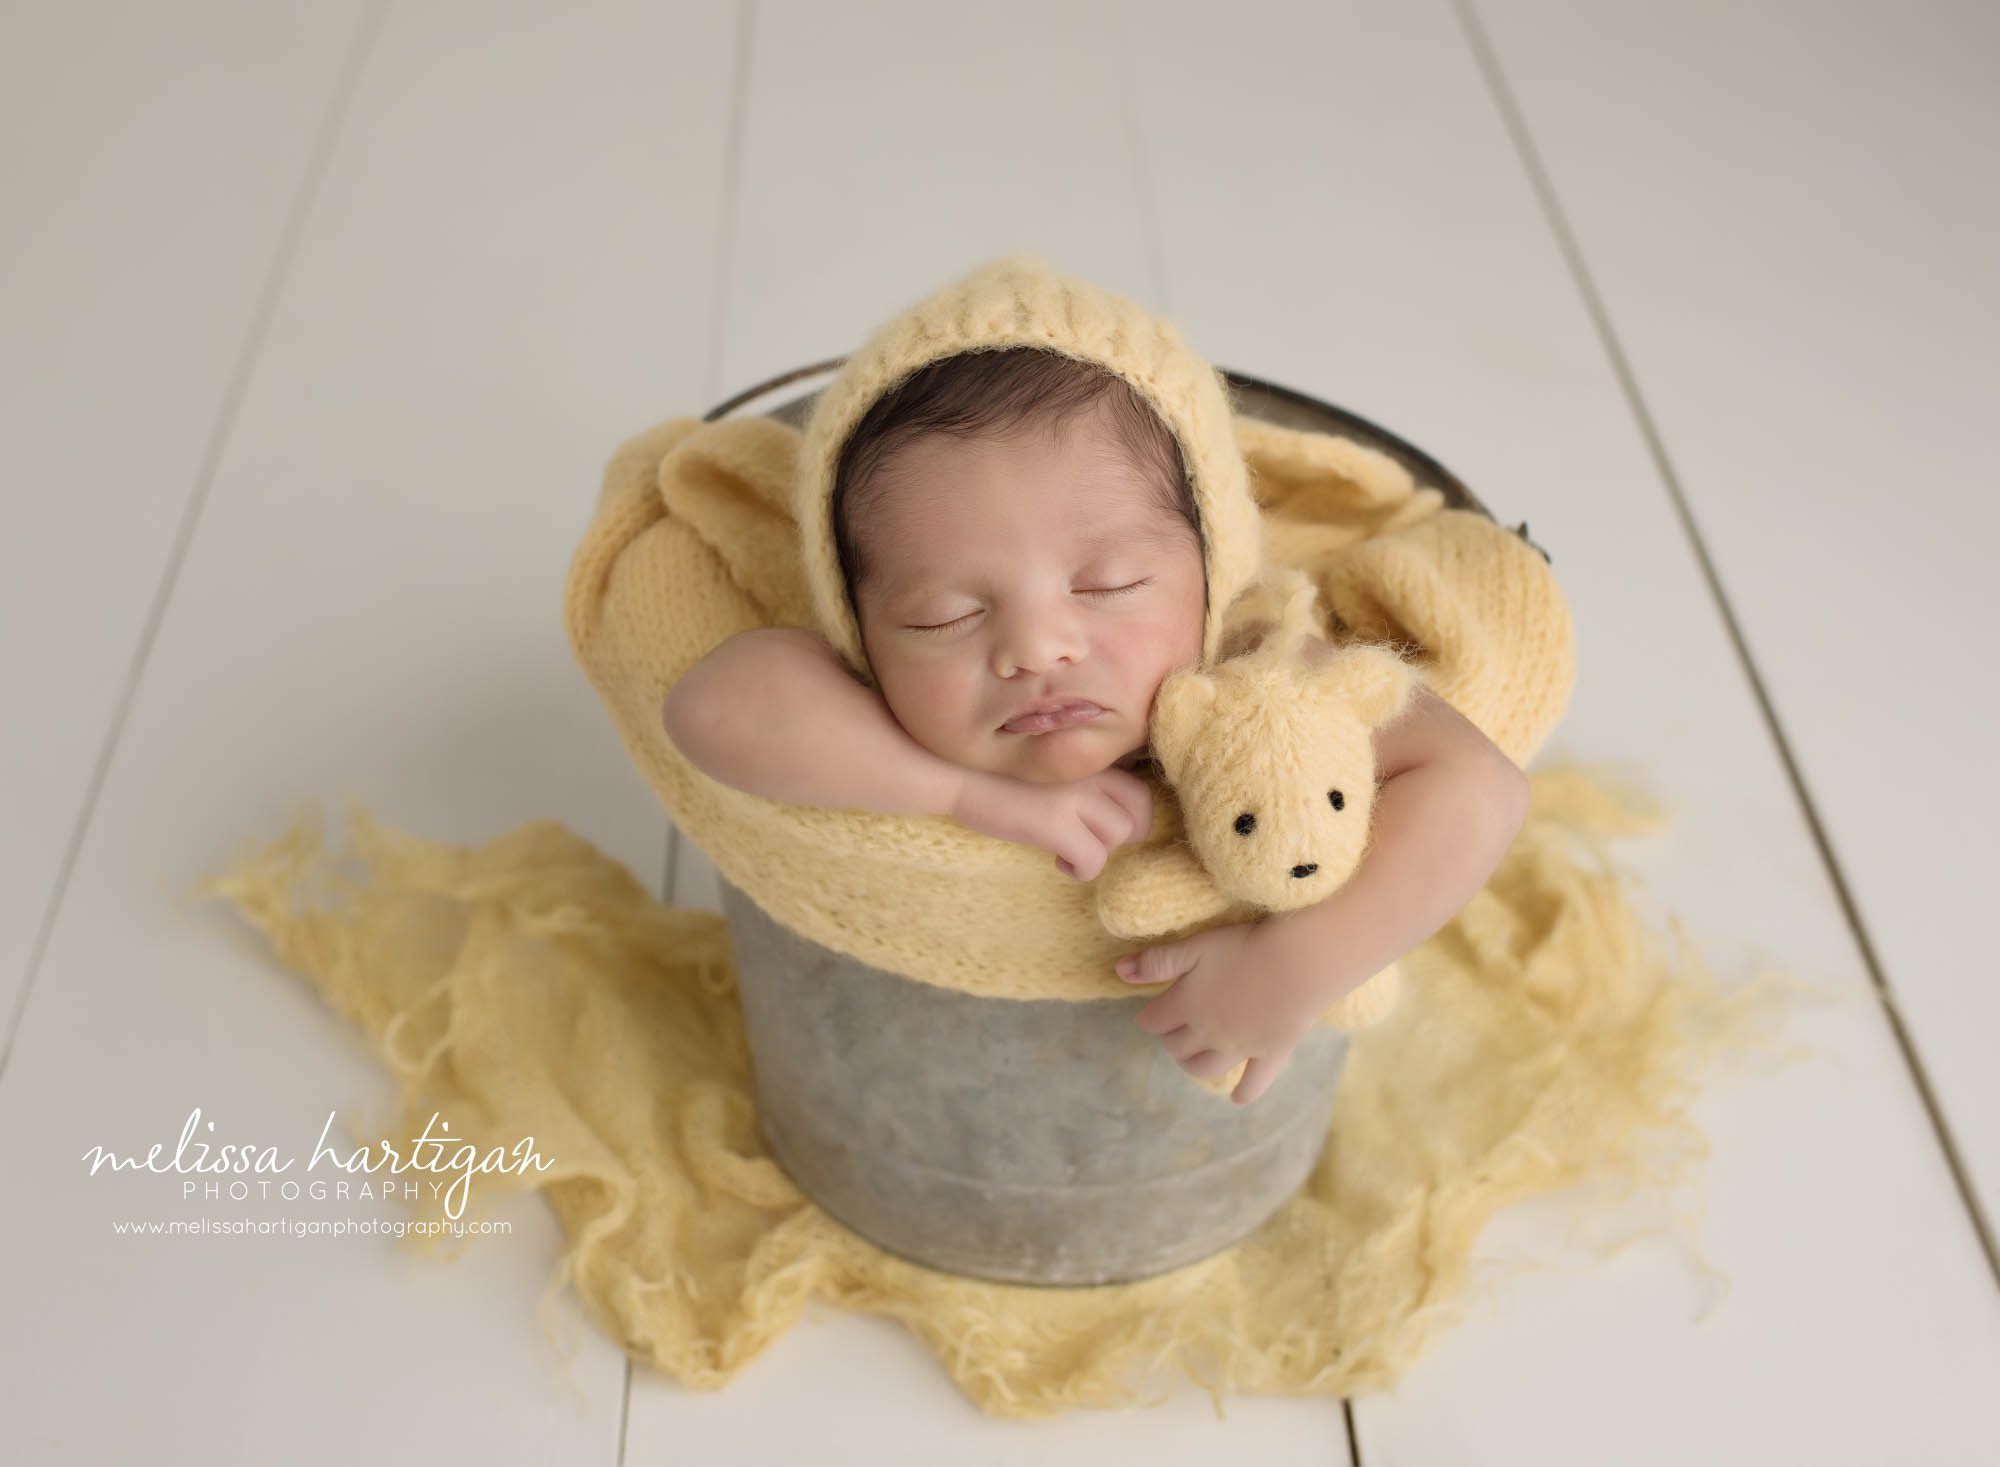 newborn baby boy posed in metal bucket with yellow knitted wrap wearing yellow knitted bonnet with matching yellow teddy bear prop